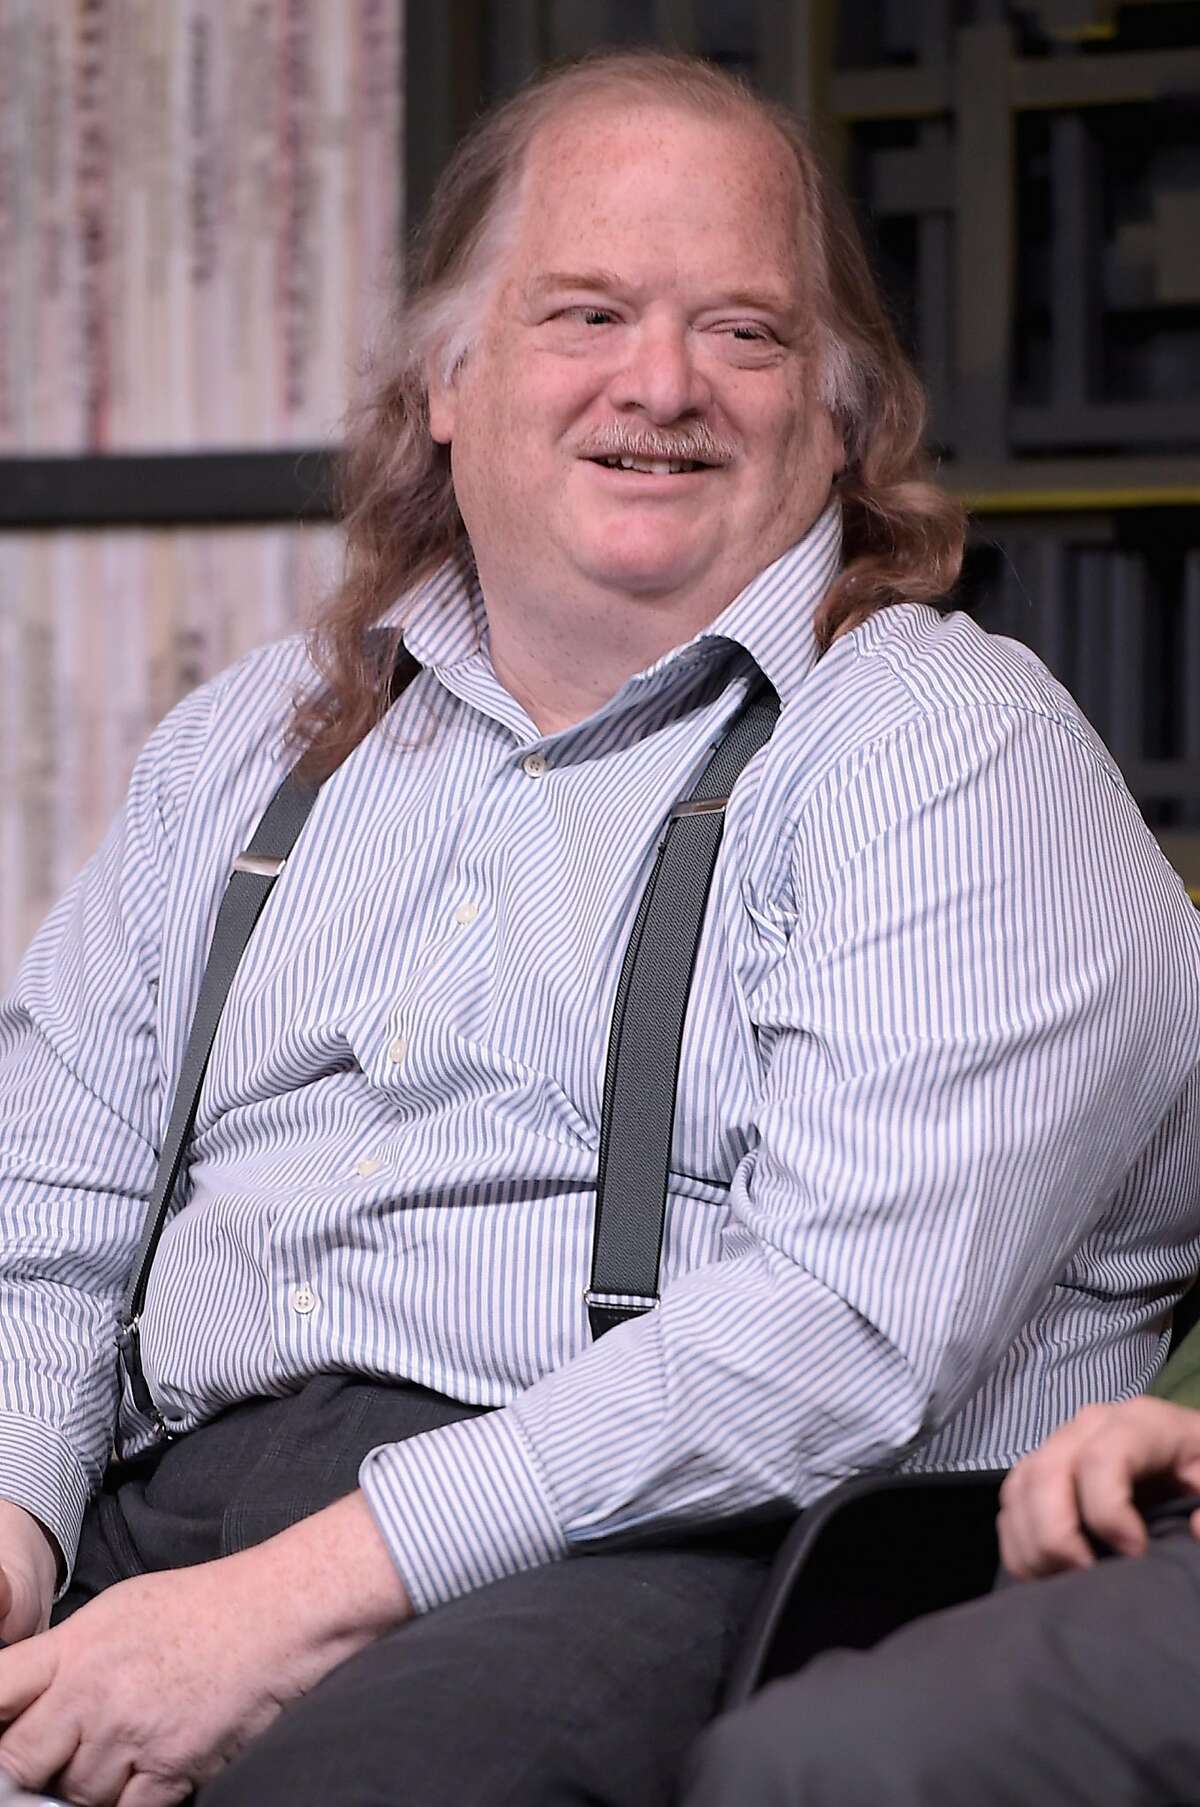 FILE - JULY 21: Pulitzer Prize-winning Los Angeles Times restaurant critic Jonathan Gold died at age 57 of pancreatic cancer, according to the Los Angeles Times. He was diagnosed with the disease earlier this month. PARK CITY, UT - JANUARY 29: Food critic Jonathan Gold speaks at Cinema Cafe during the 2015 Sundance Film Festival on January 29, 2015 in Park City, Utah. (Photo by Michael Loccisano/Getty Images for Sundance)